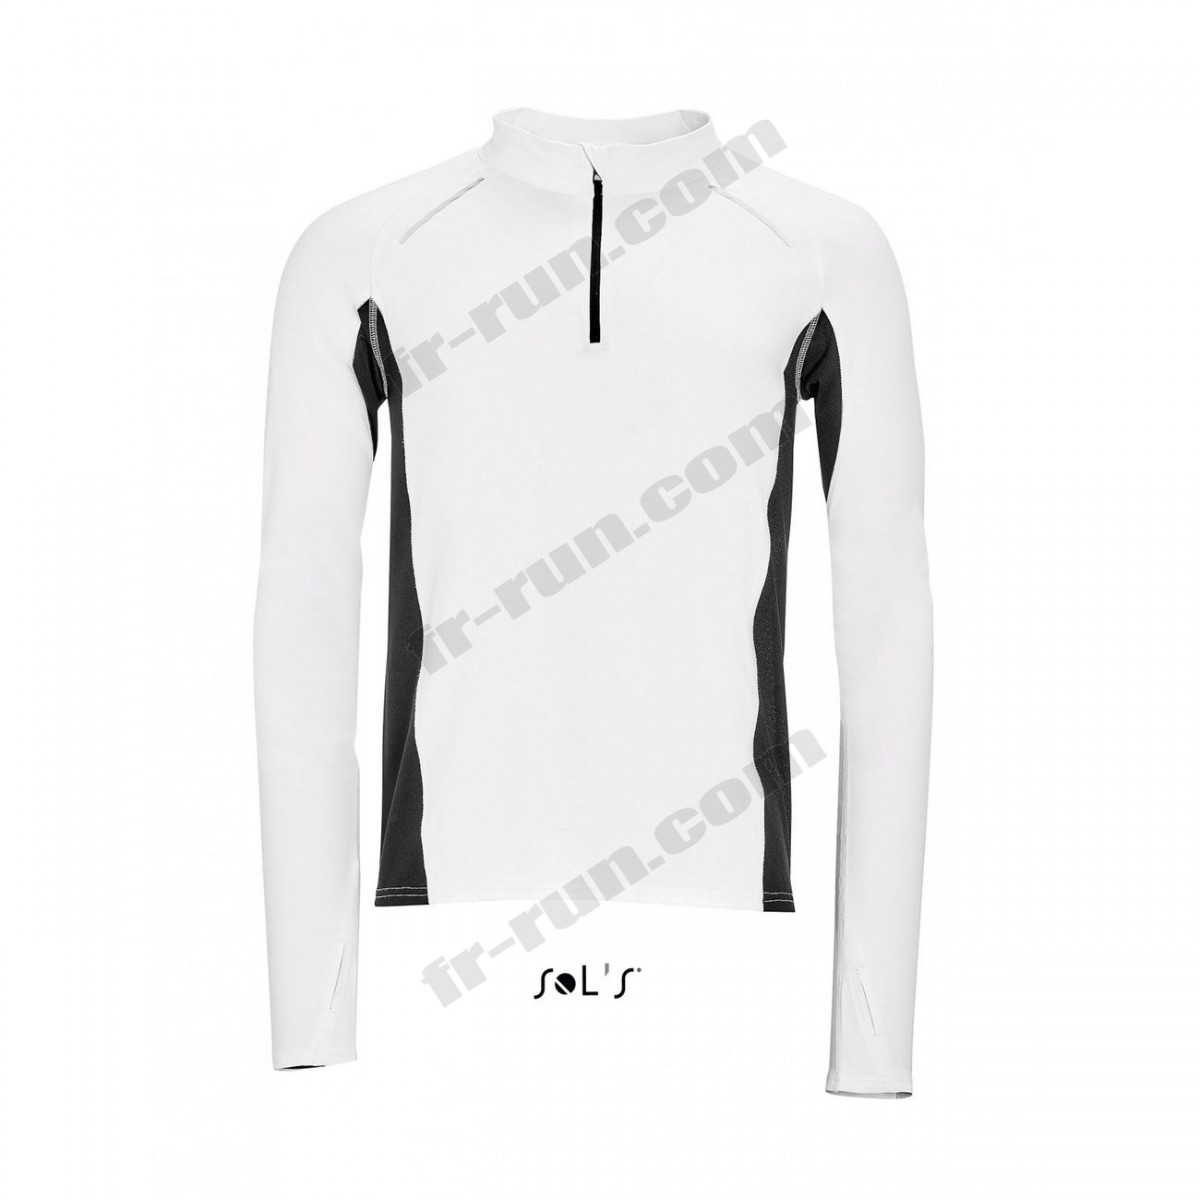 Sol's/running adulte SOL'S t-shirt running manches longues - Homme - 01416 - blanc √ Nouveau style √ Soldes - -1